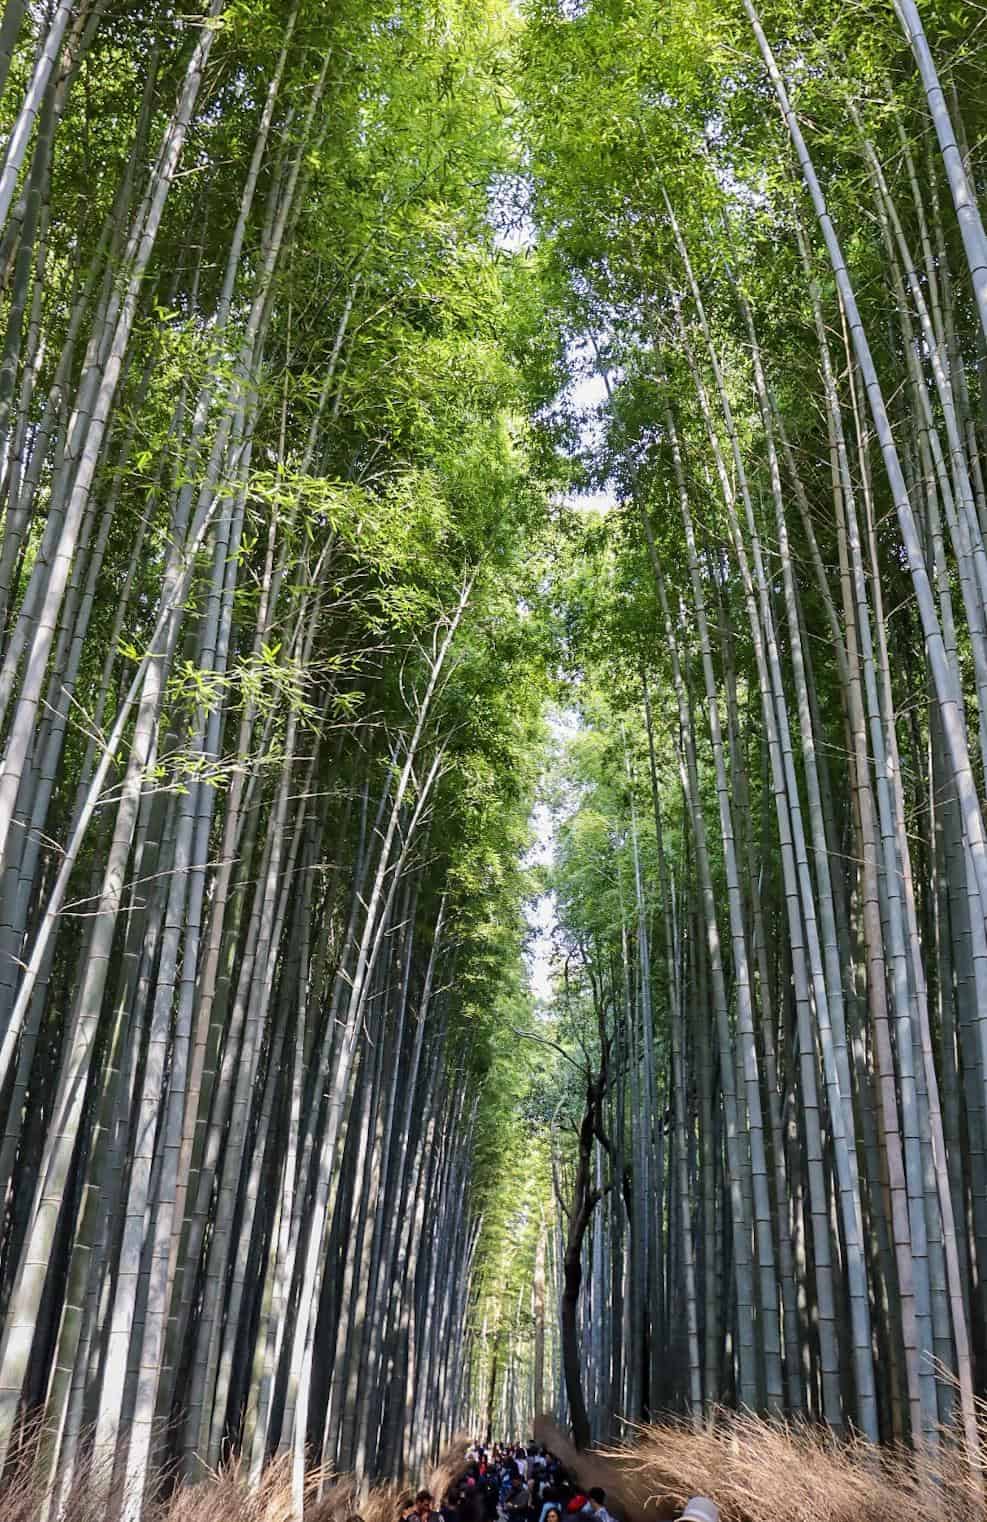 Kyoto 1 Day Itinerary, Bamboo Forest